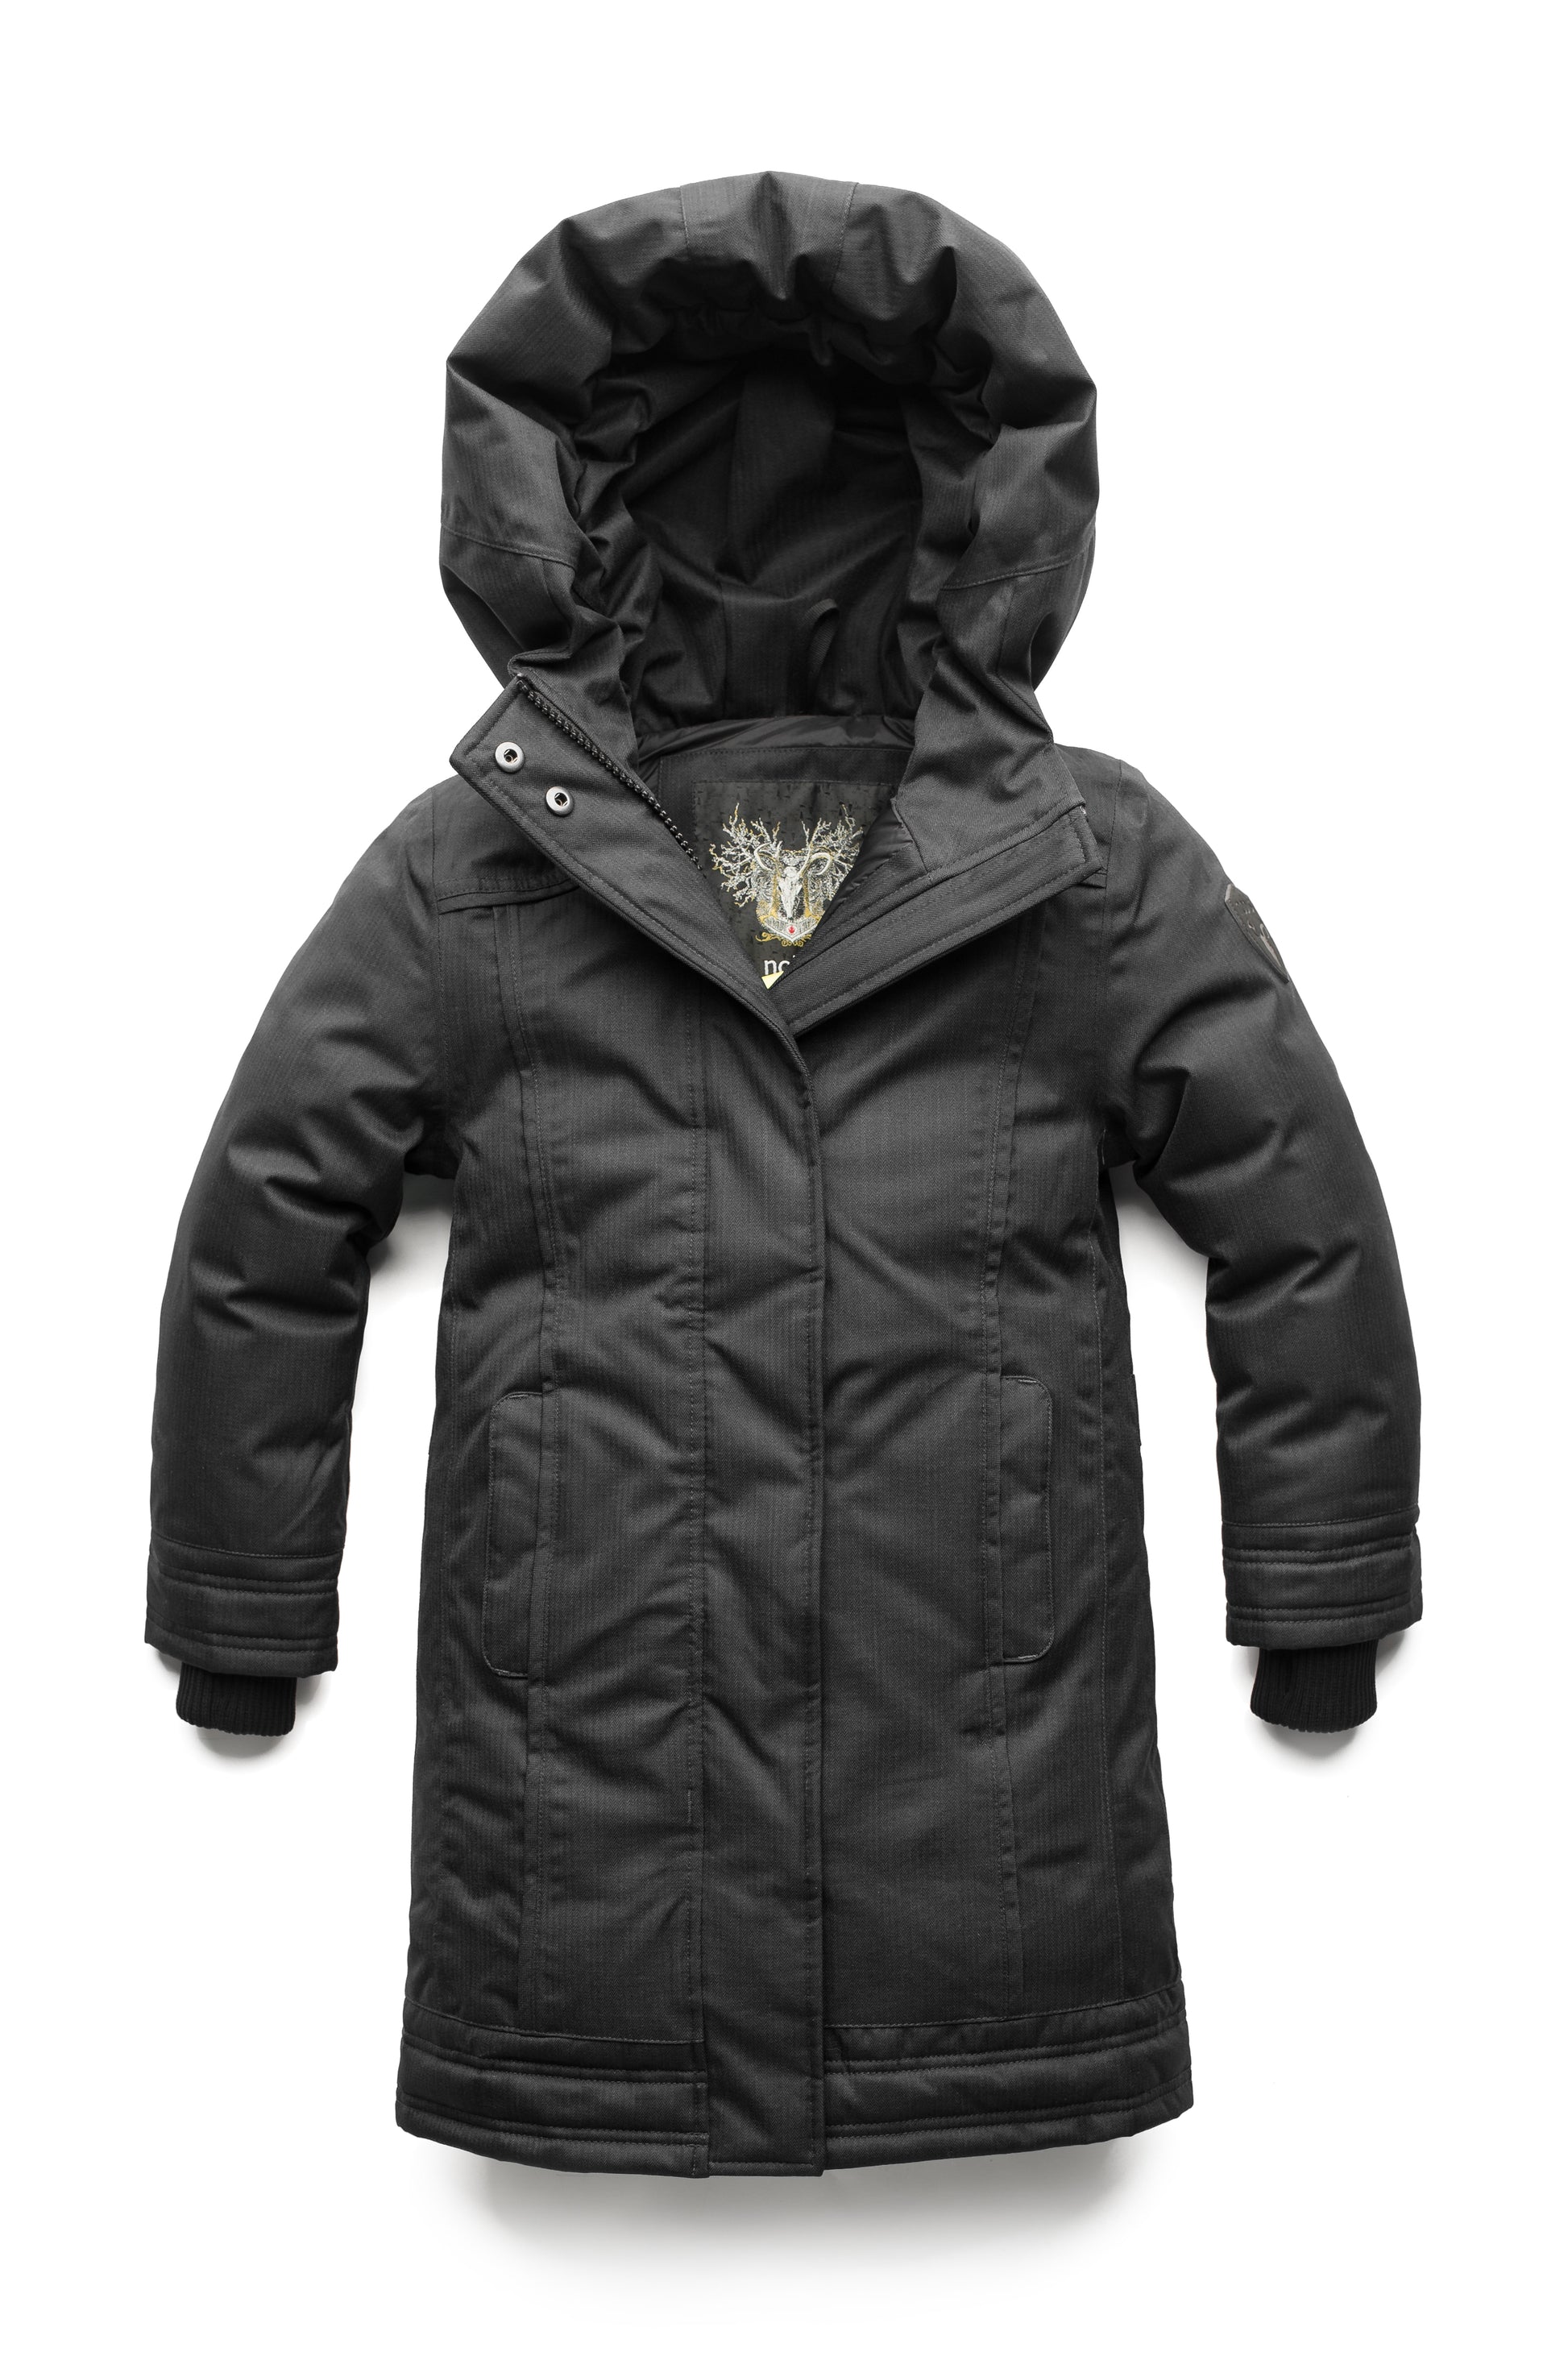 Women's Thigh length own parka with a furless oversized hood in CH Black